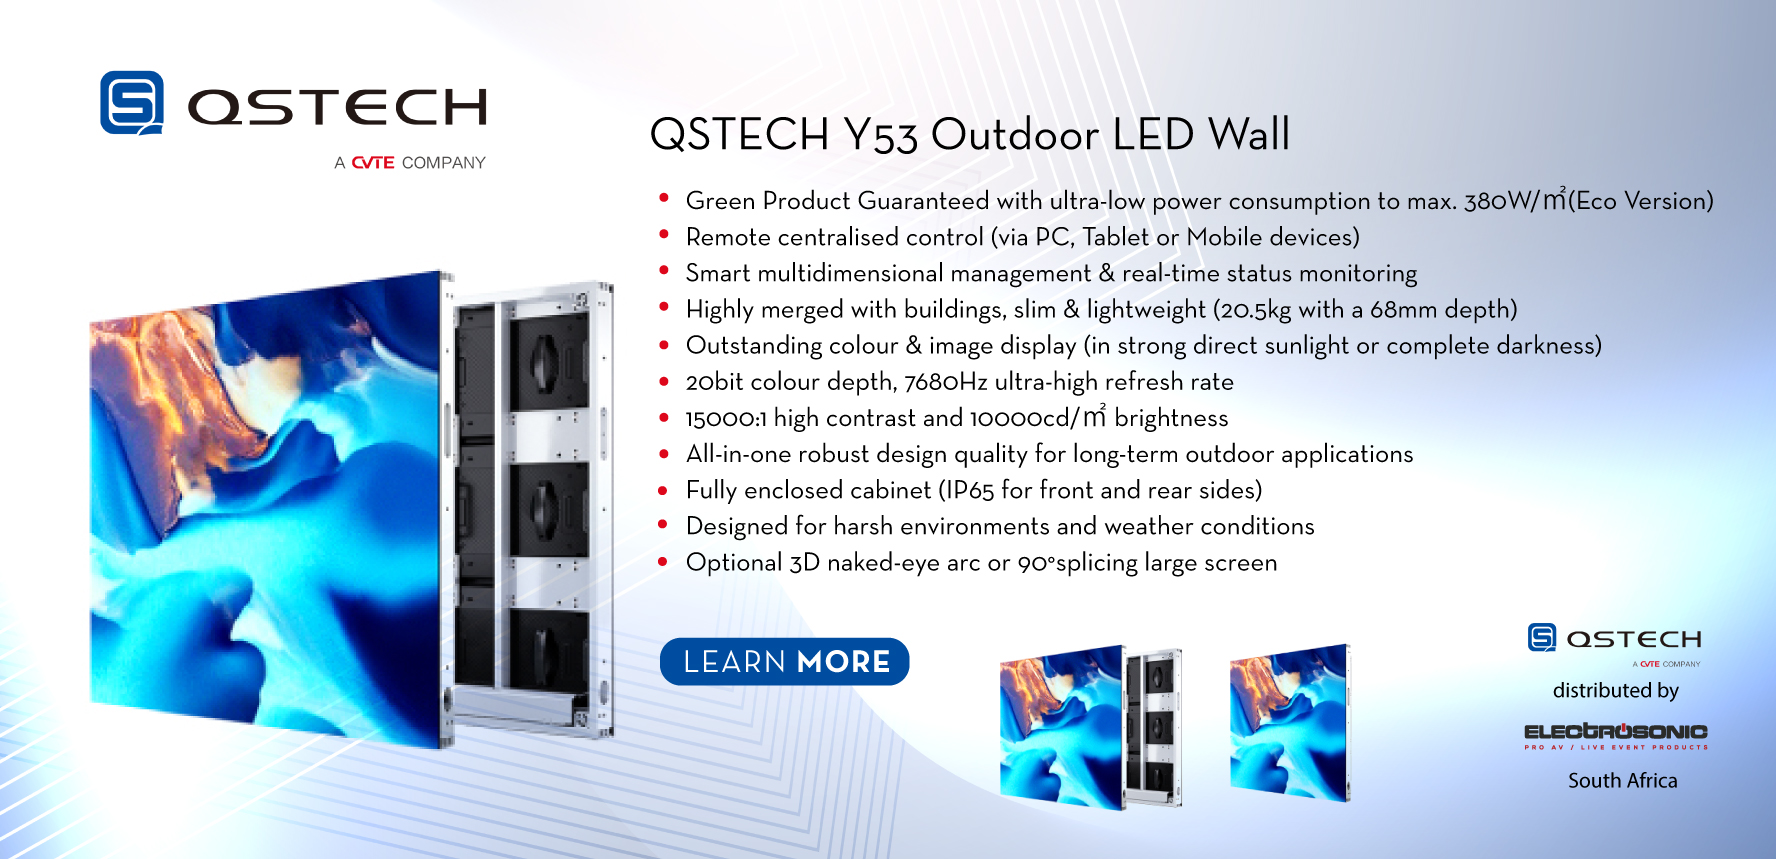 QSTECH Y53 Outdoor LED Wall